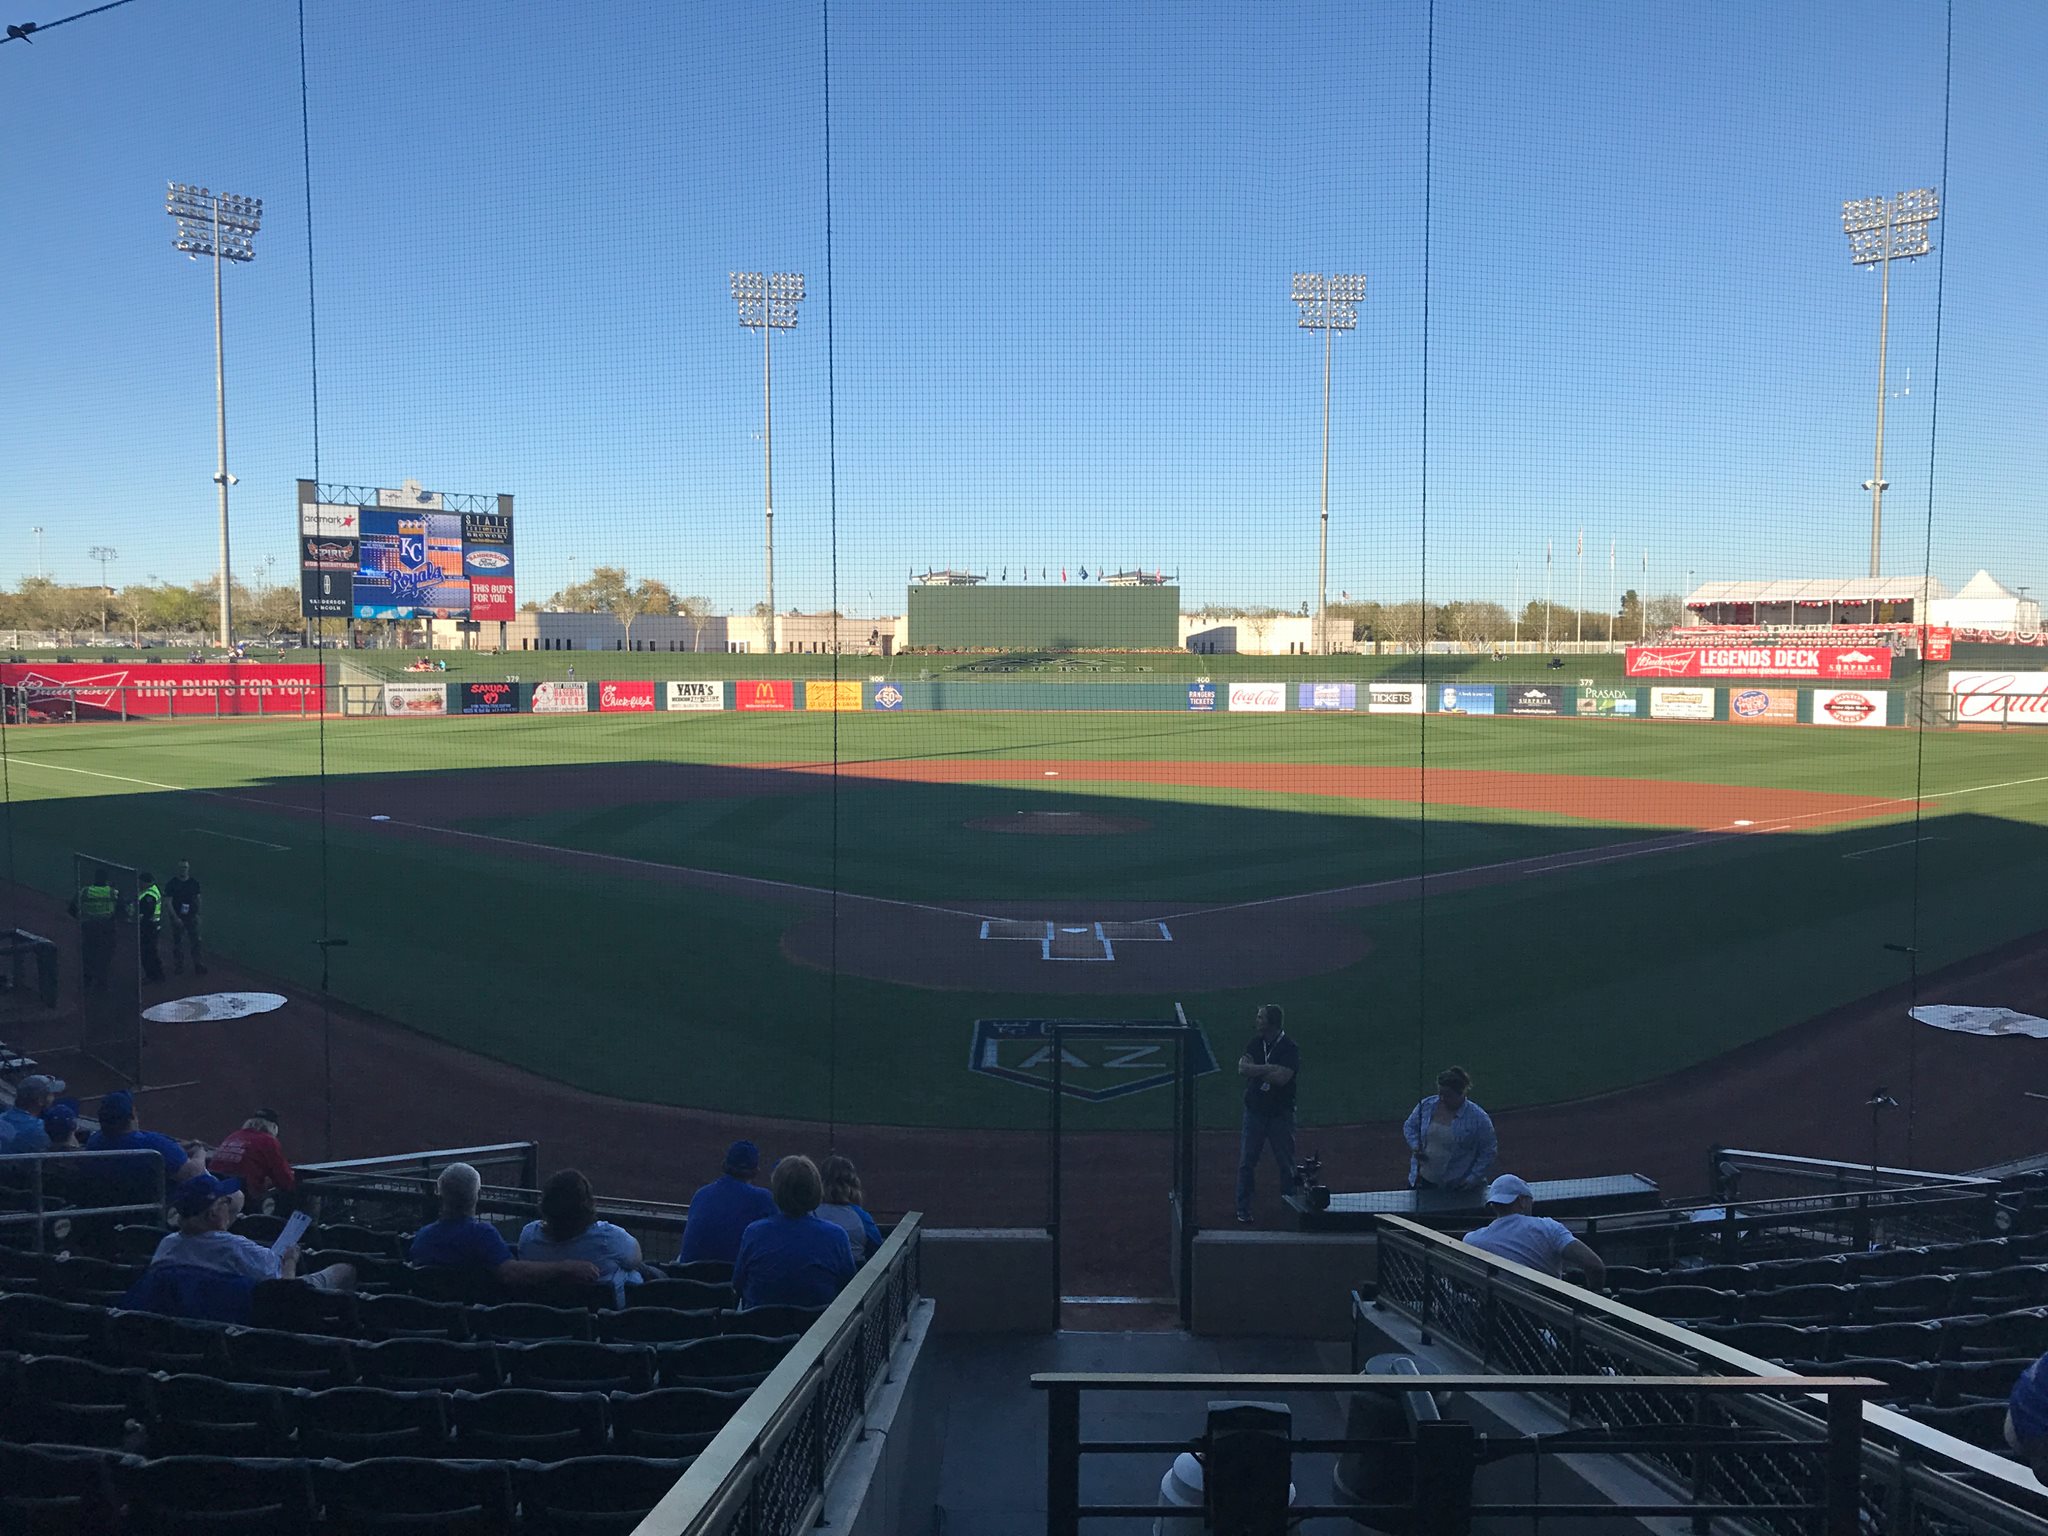 Surprise Stadium is aesthetically nice but underwhelming, while falling behind most other spring training facilities in fan-friendly amenities.